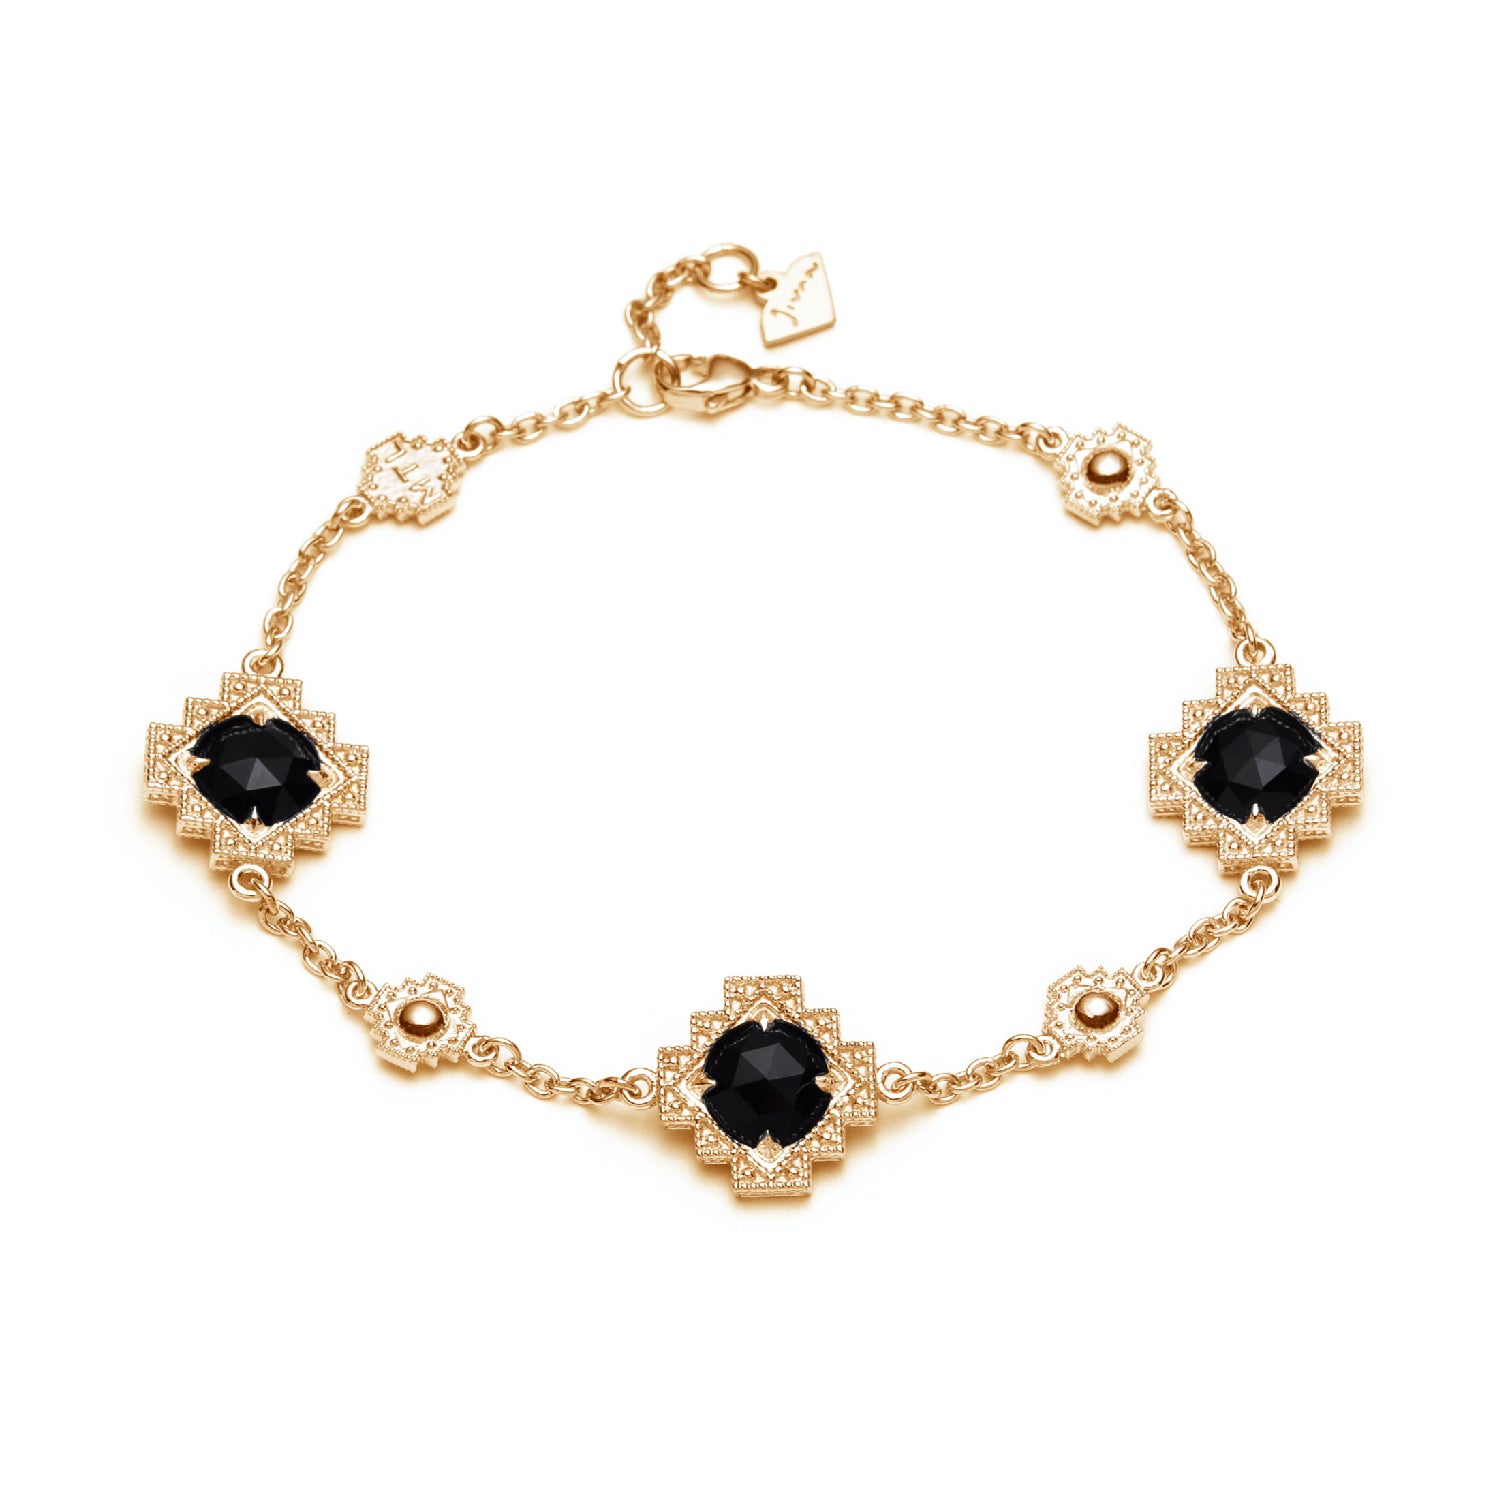 Double-Sided Rose Cut Black Onyx Step Motif Bracelet in Yellow Gold